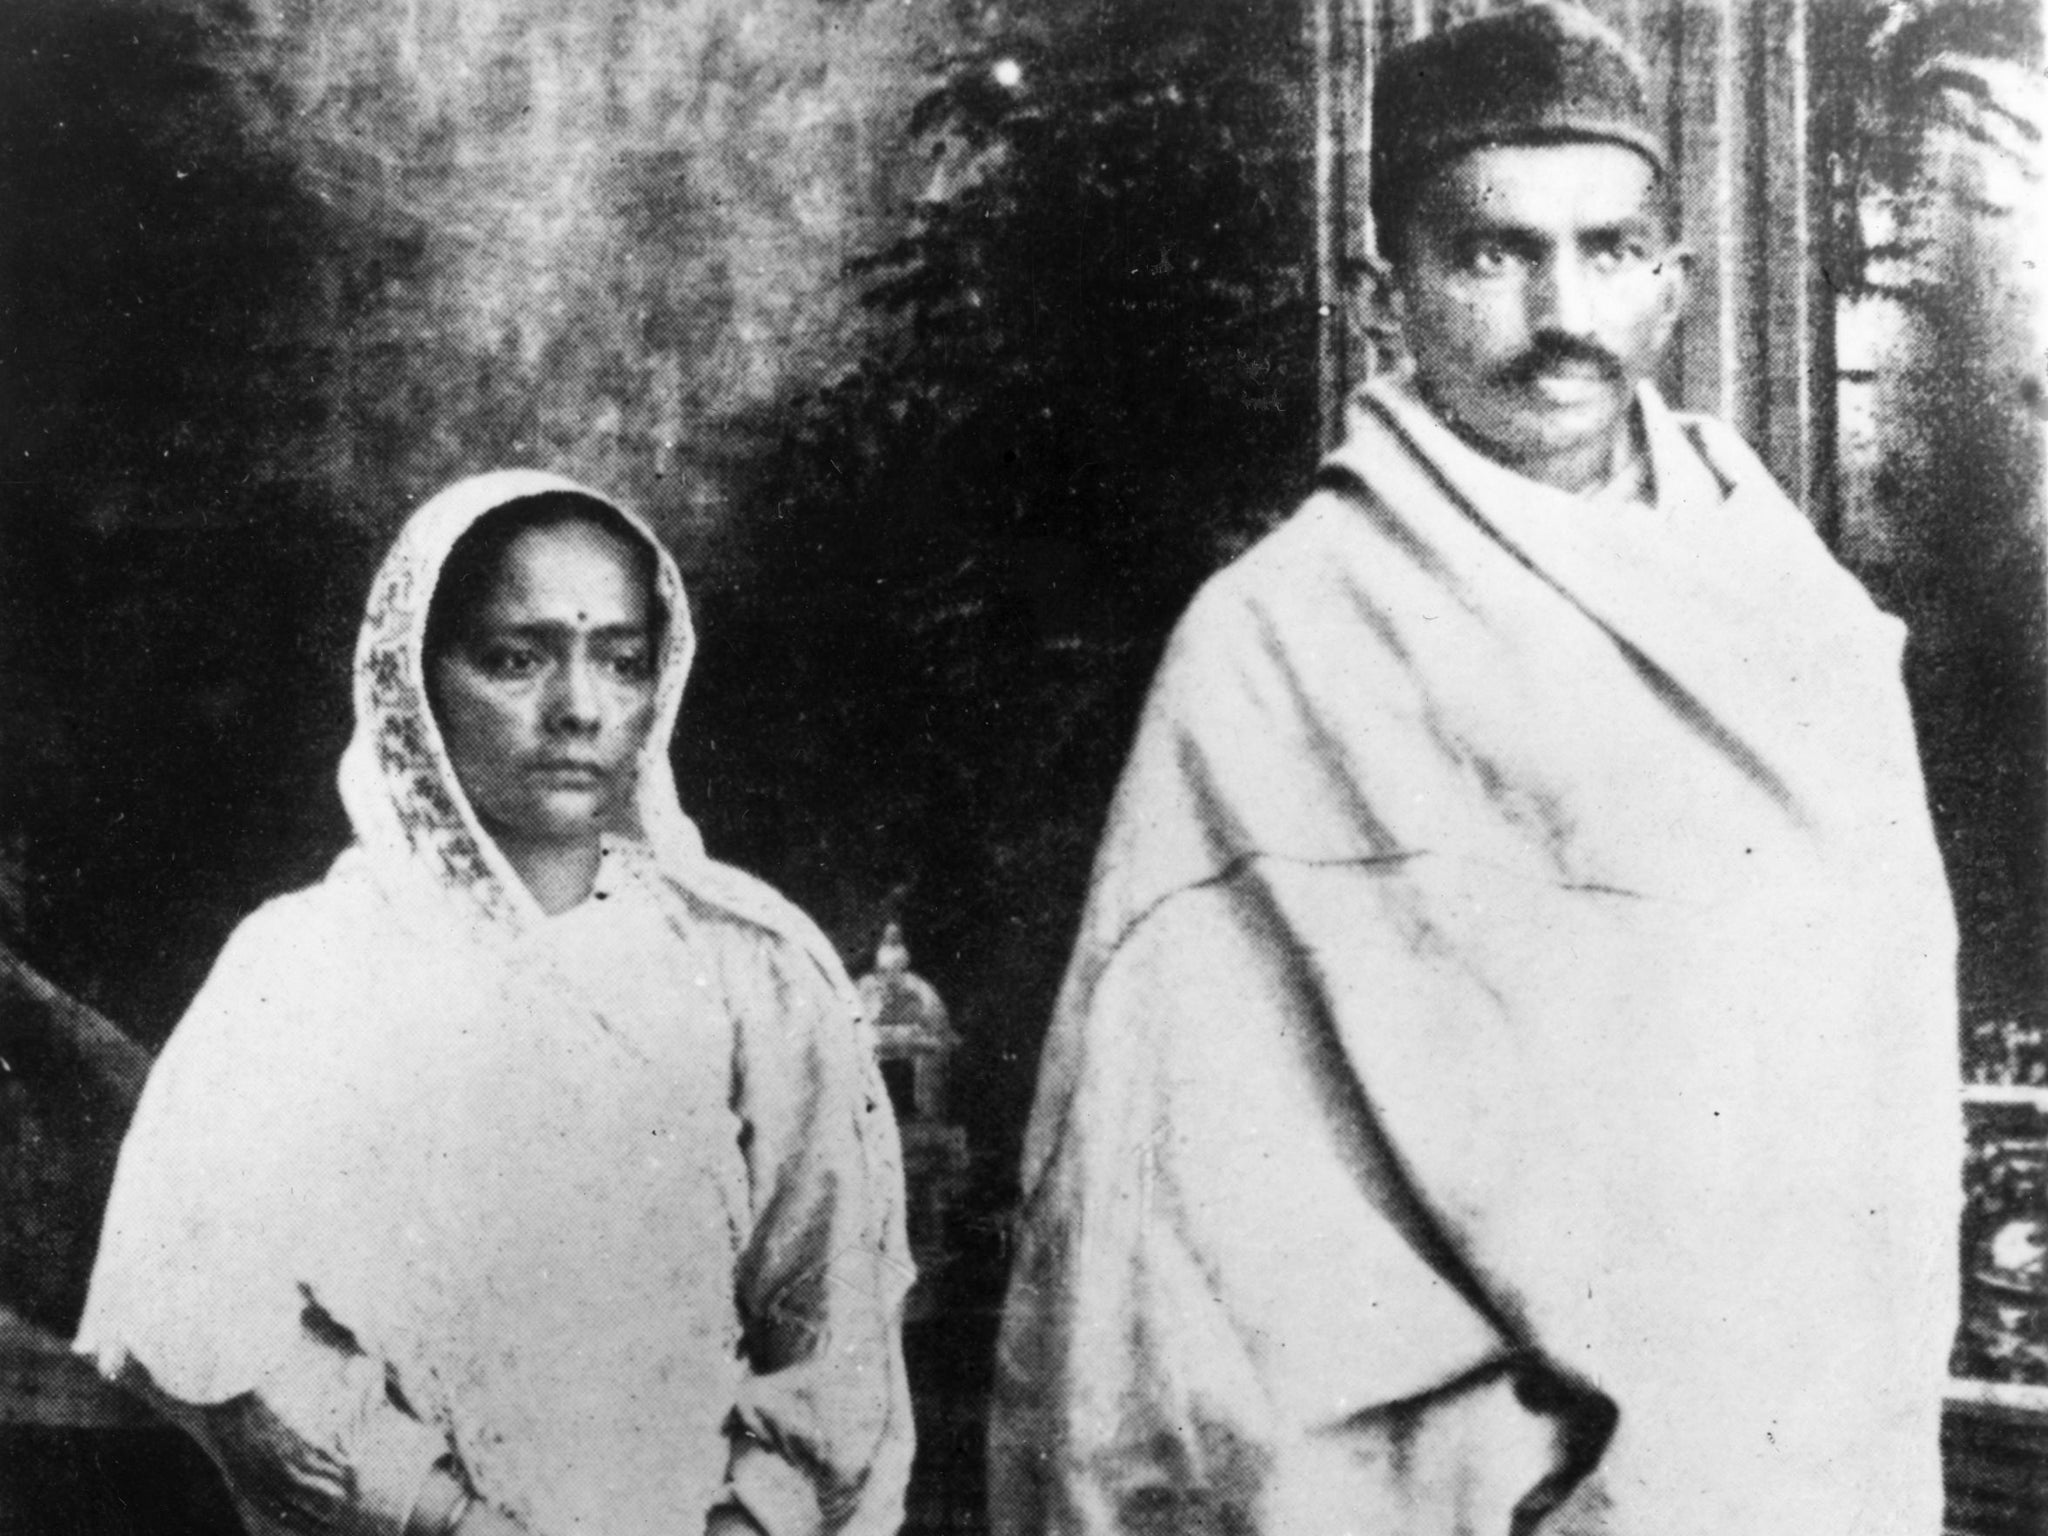 Mahatma Gandhi with his wife shortly before his arrest for conspiracy